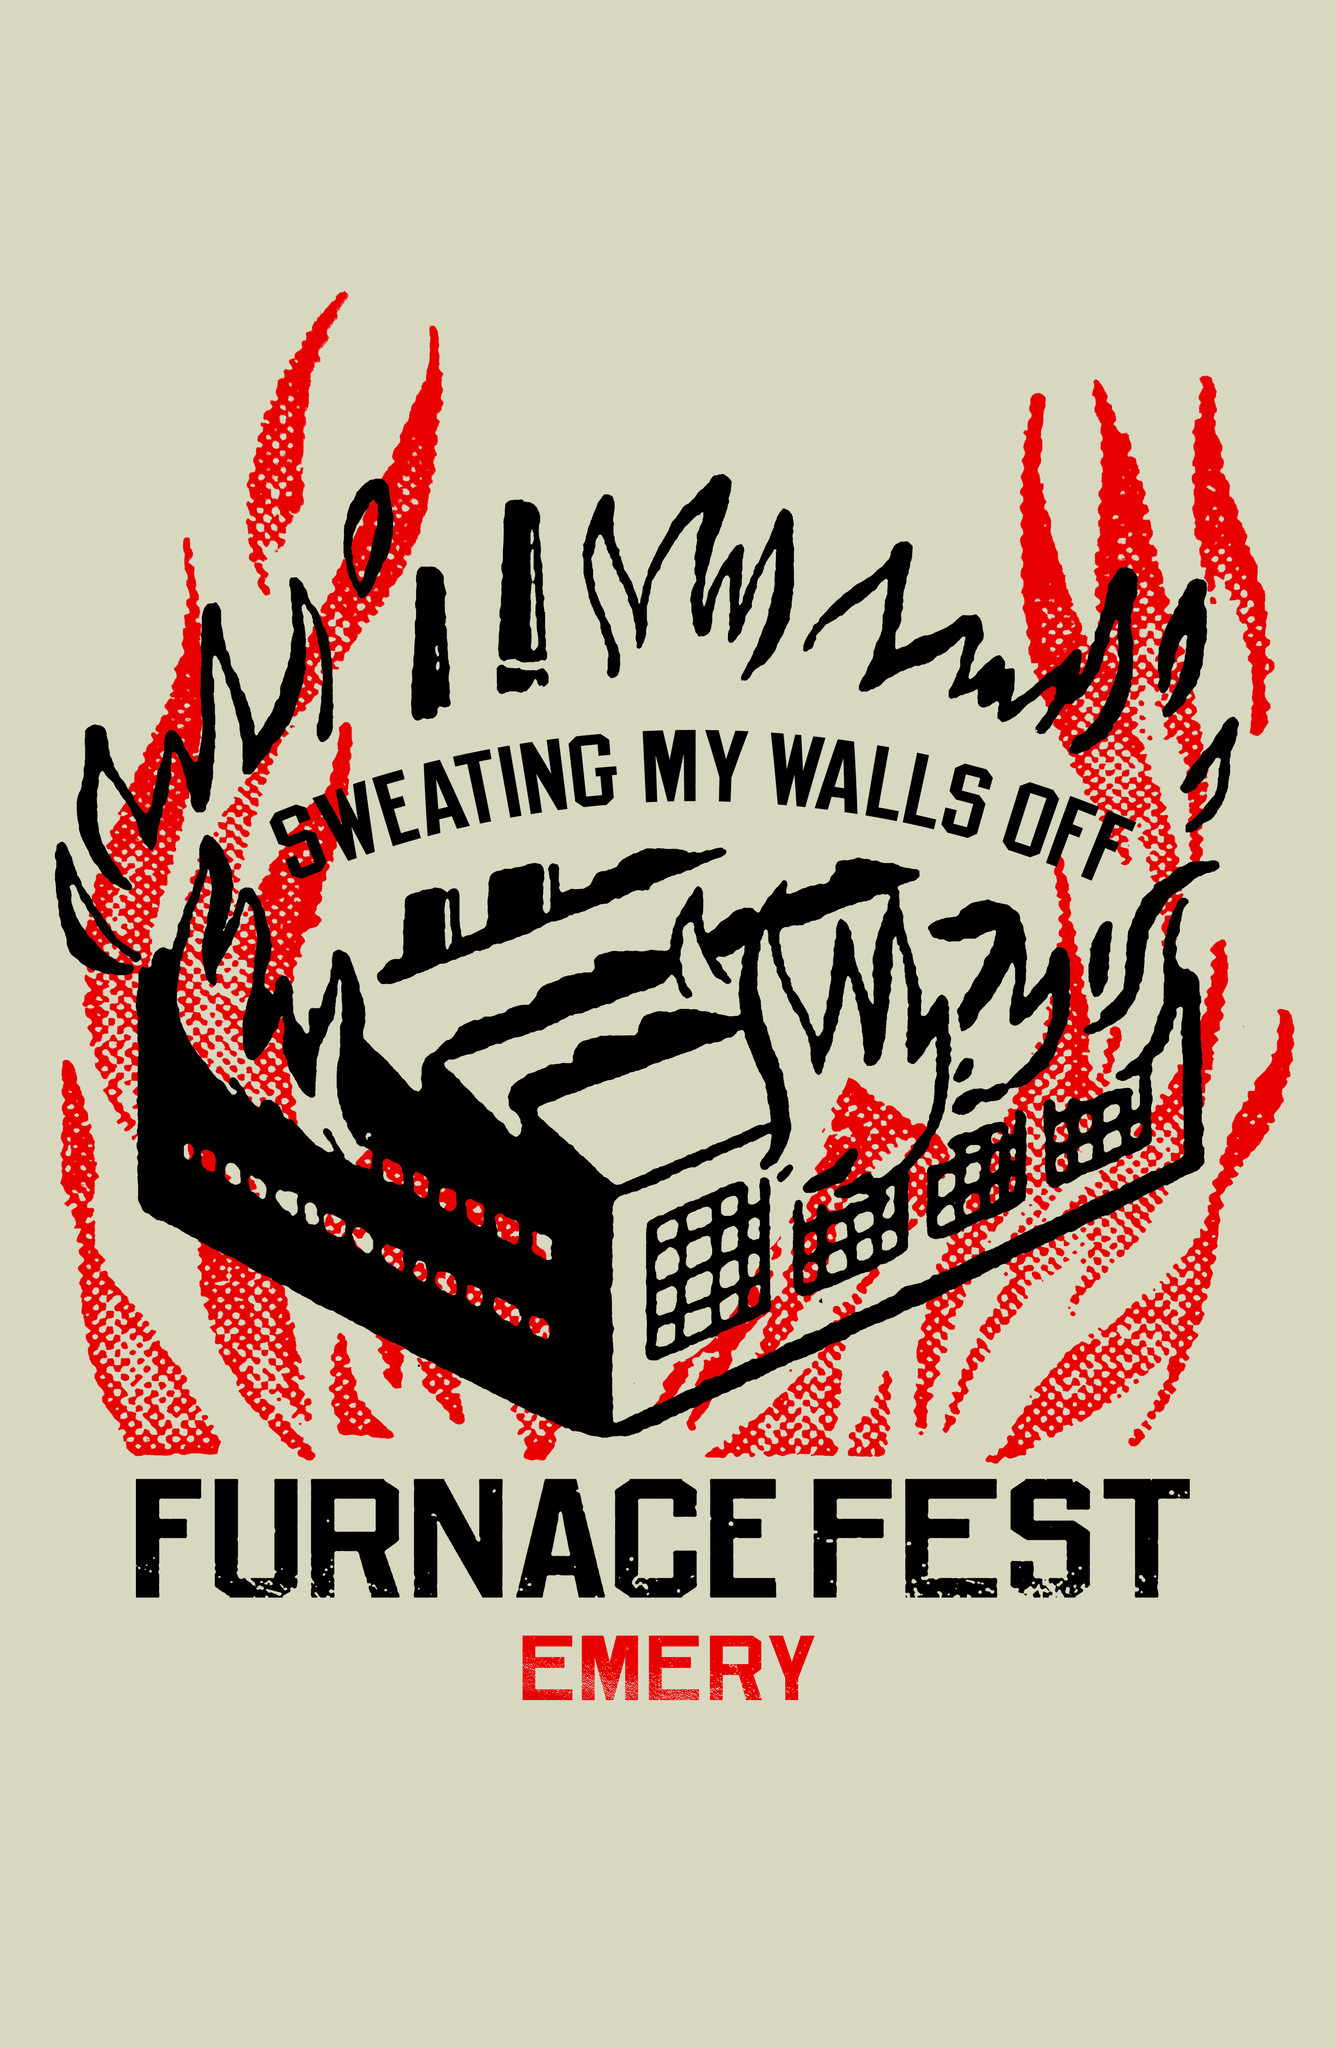 Sweating My Walls Off Poster (Furnace Fest)